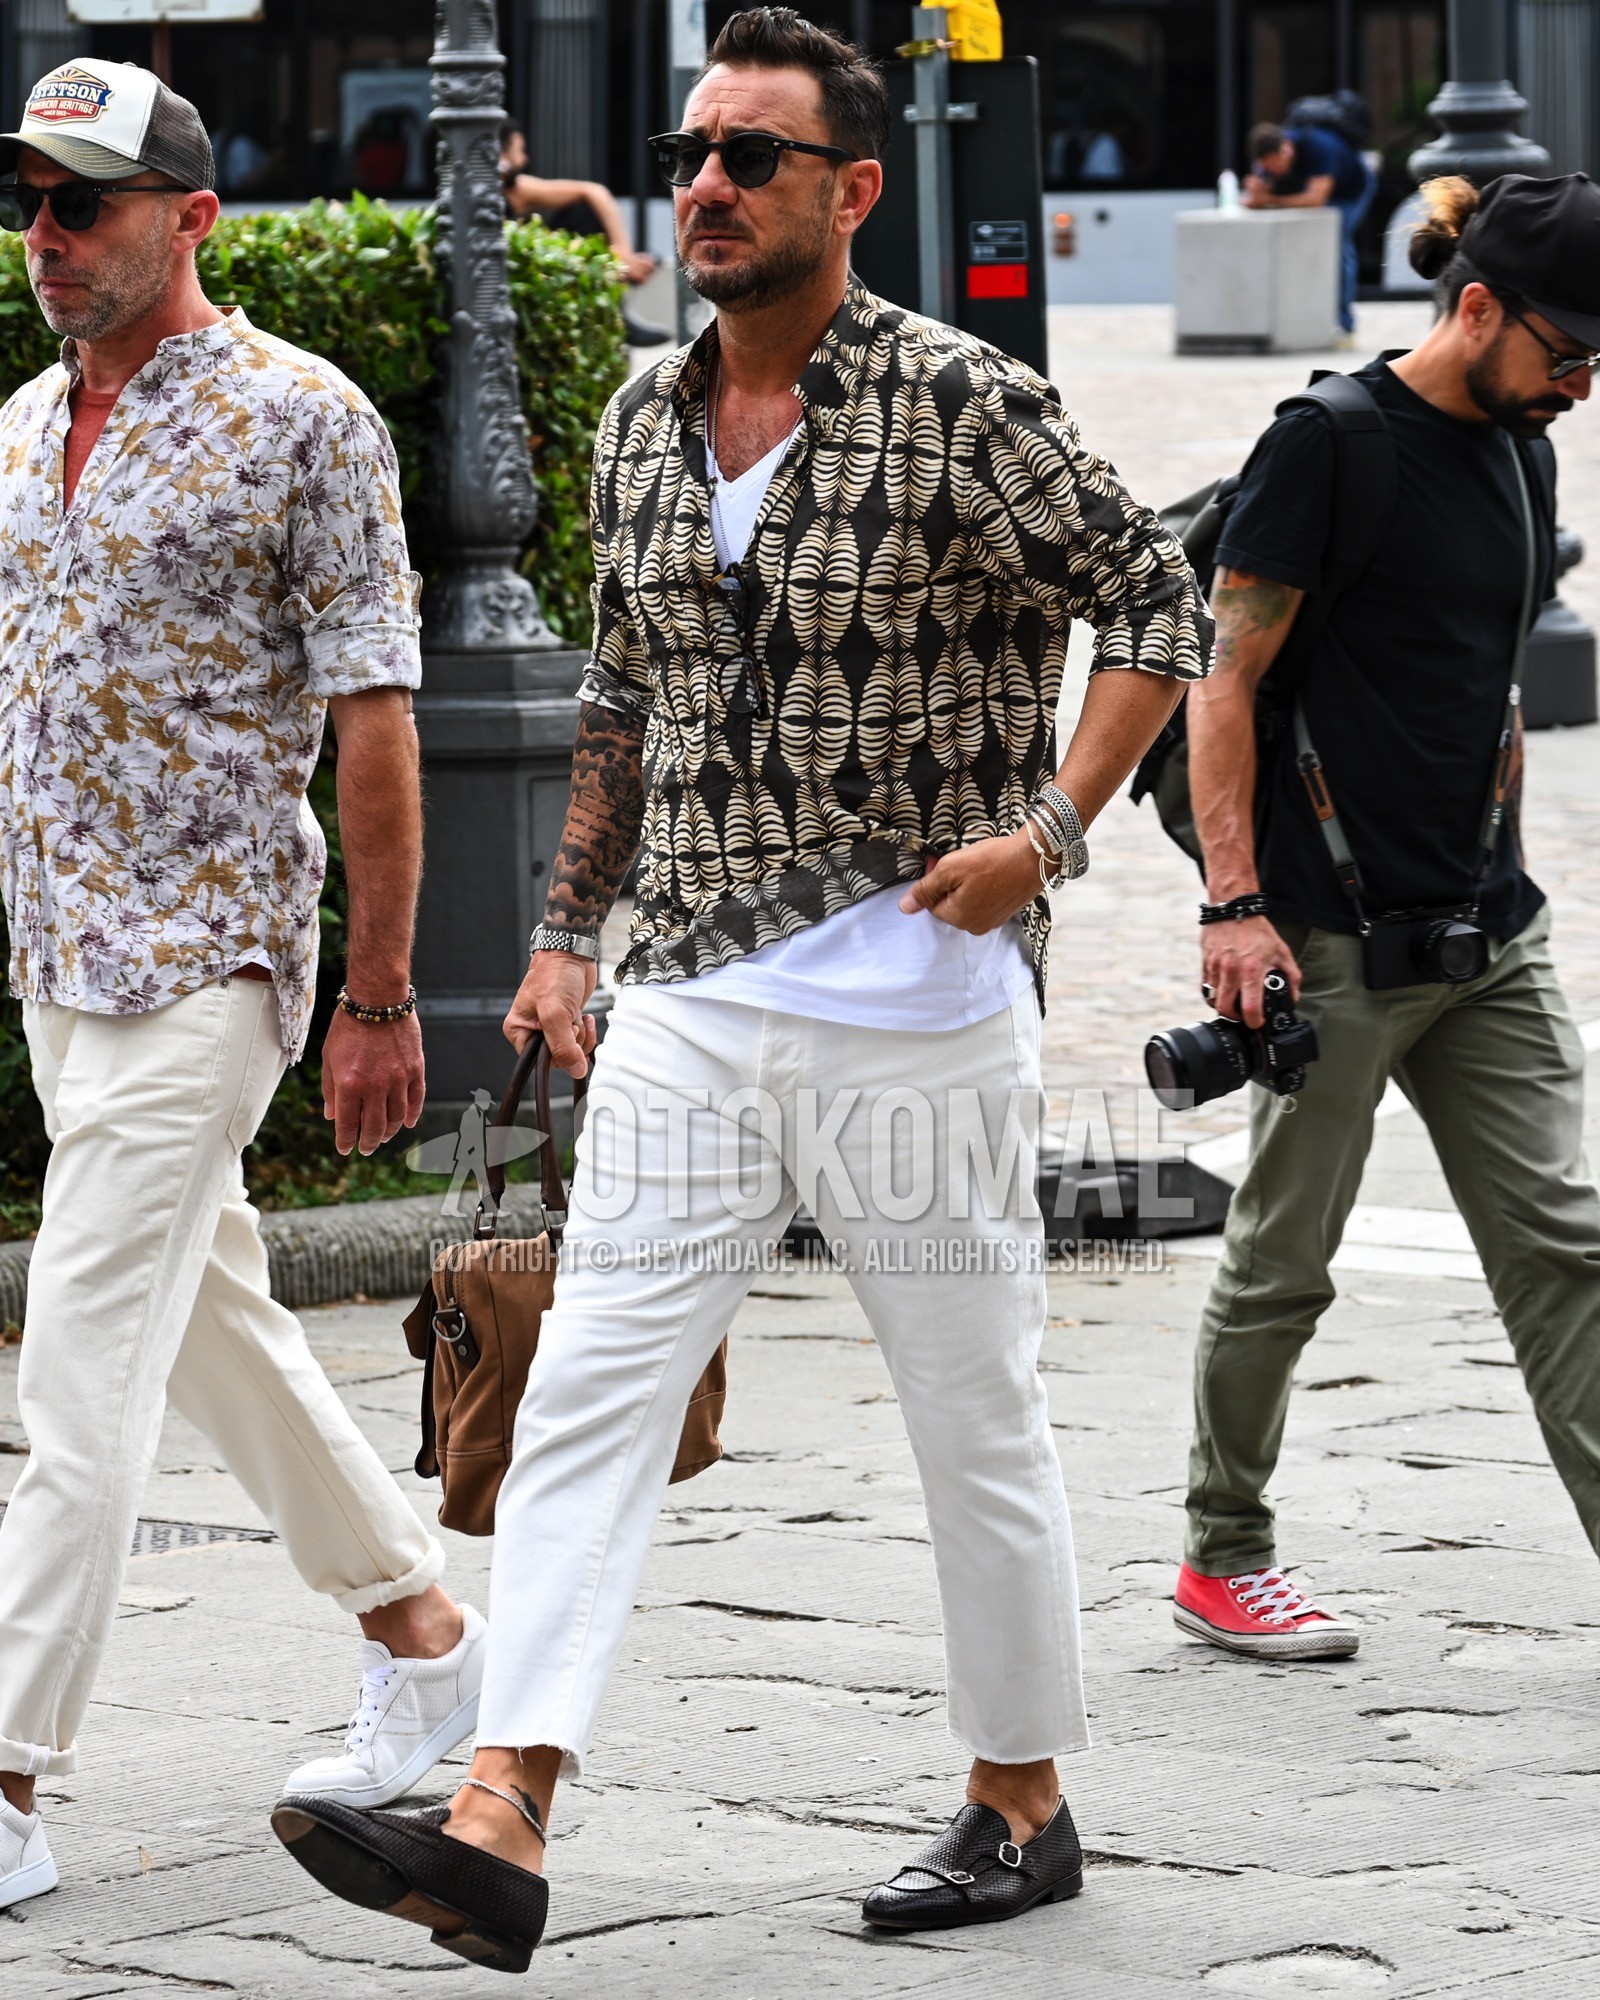 Men's spring summer autumn outfit with black plain sunglasses, black tops/innerwear shirt, white plain t-shirt, white plain chinos, brown  loafers leather shoes.